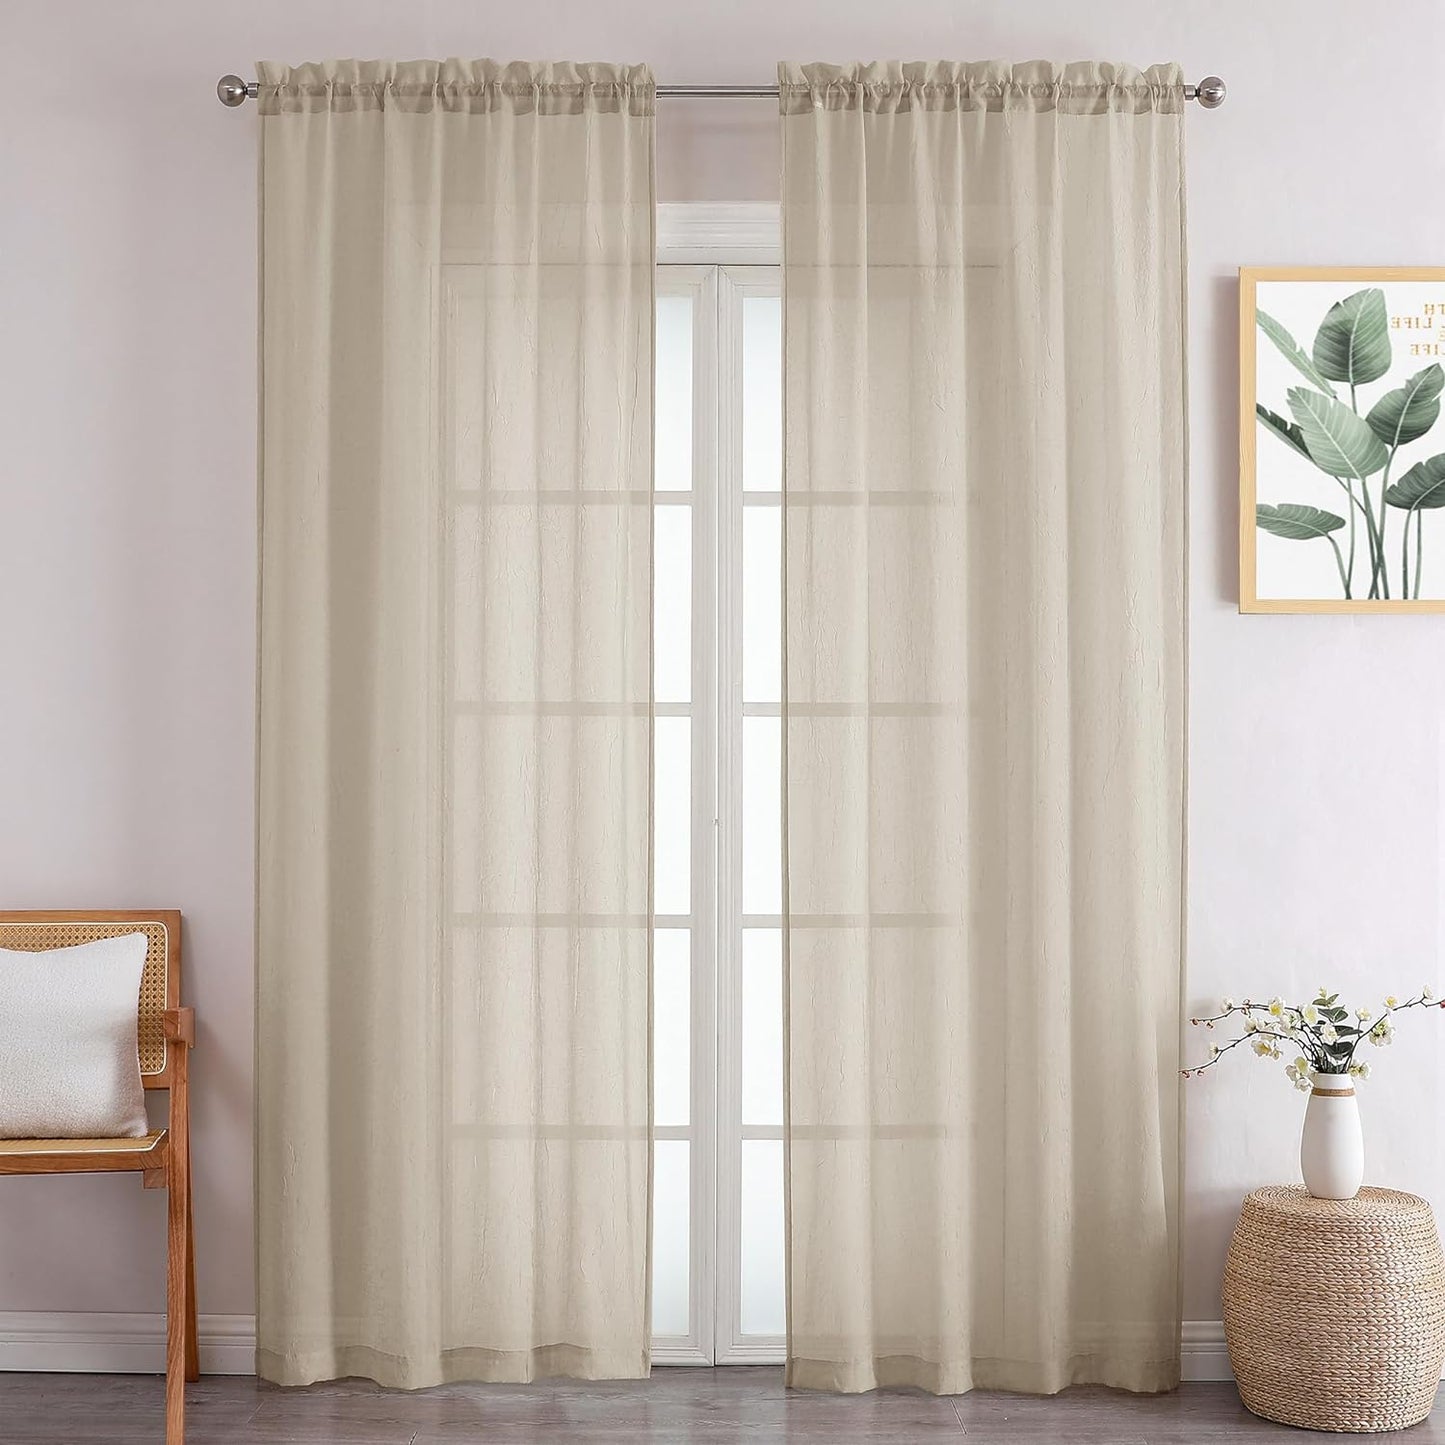 Chyhomenyc Crushed White Sheer Valances for Window 14 Inch Length 2 PCS, Crinkle Voile Short Kitchen Curtains with Dual Rod Pockets，Gauzy Bedroom Curtain Valance，Each 42Wx14L Inches  Chyhomenyc Taupe 42 W X 96 L 